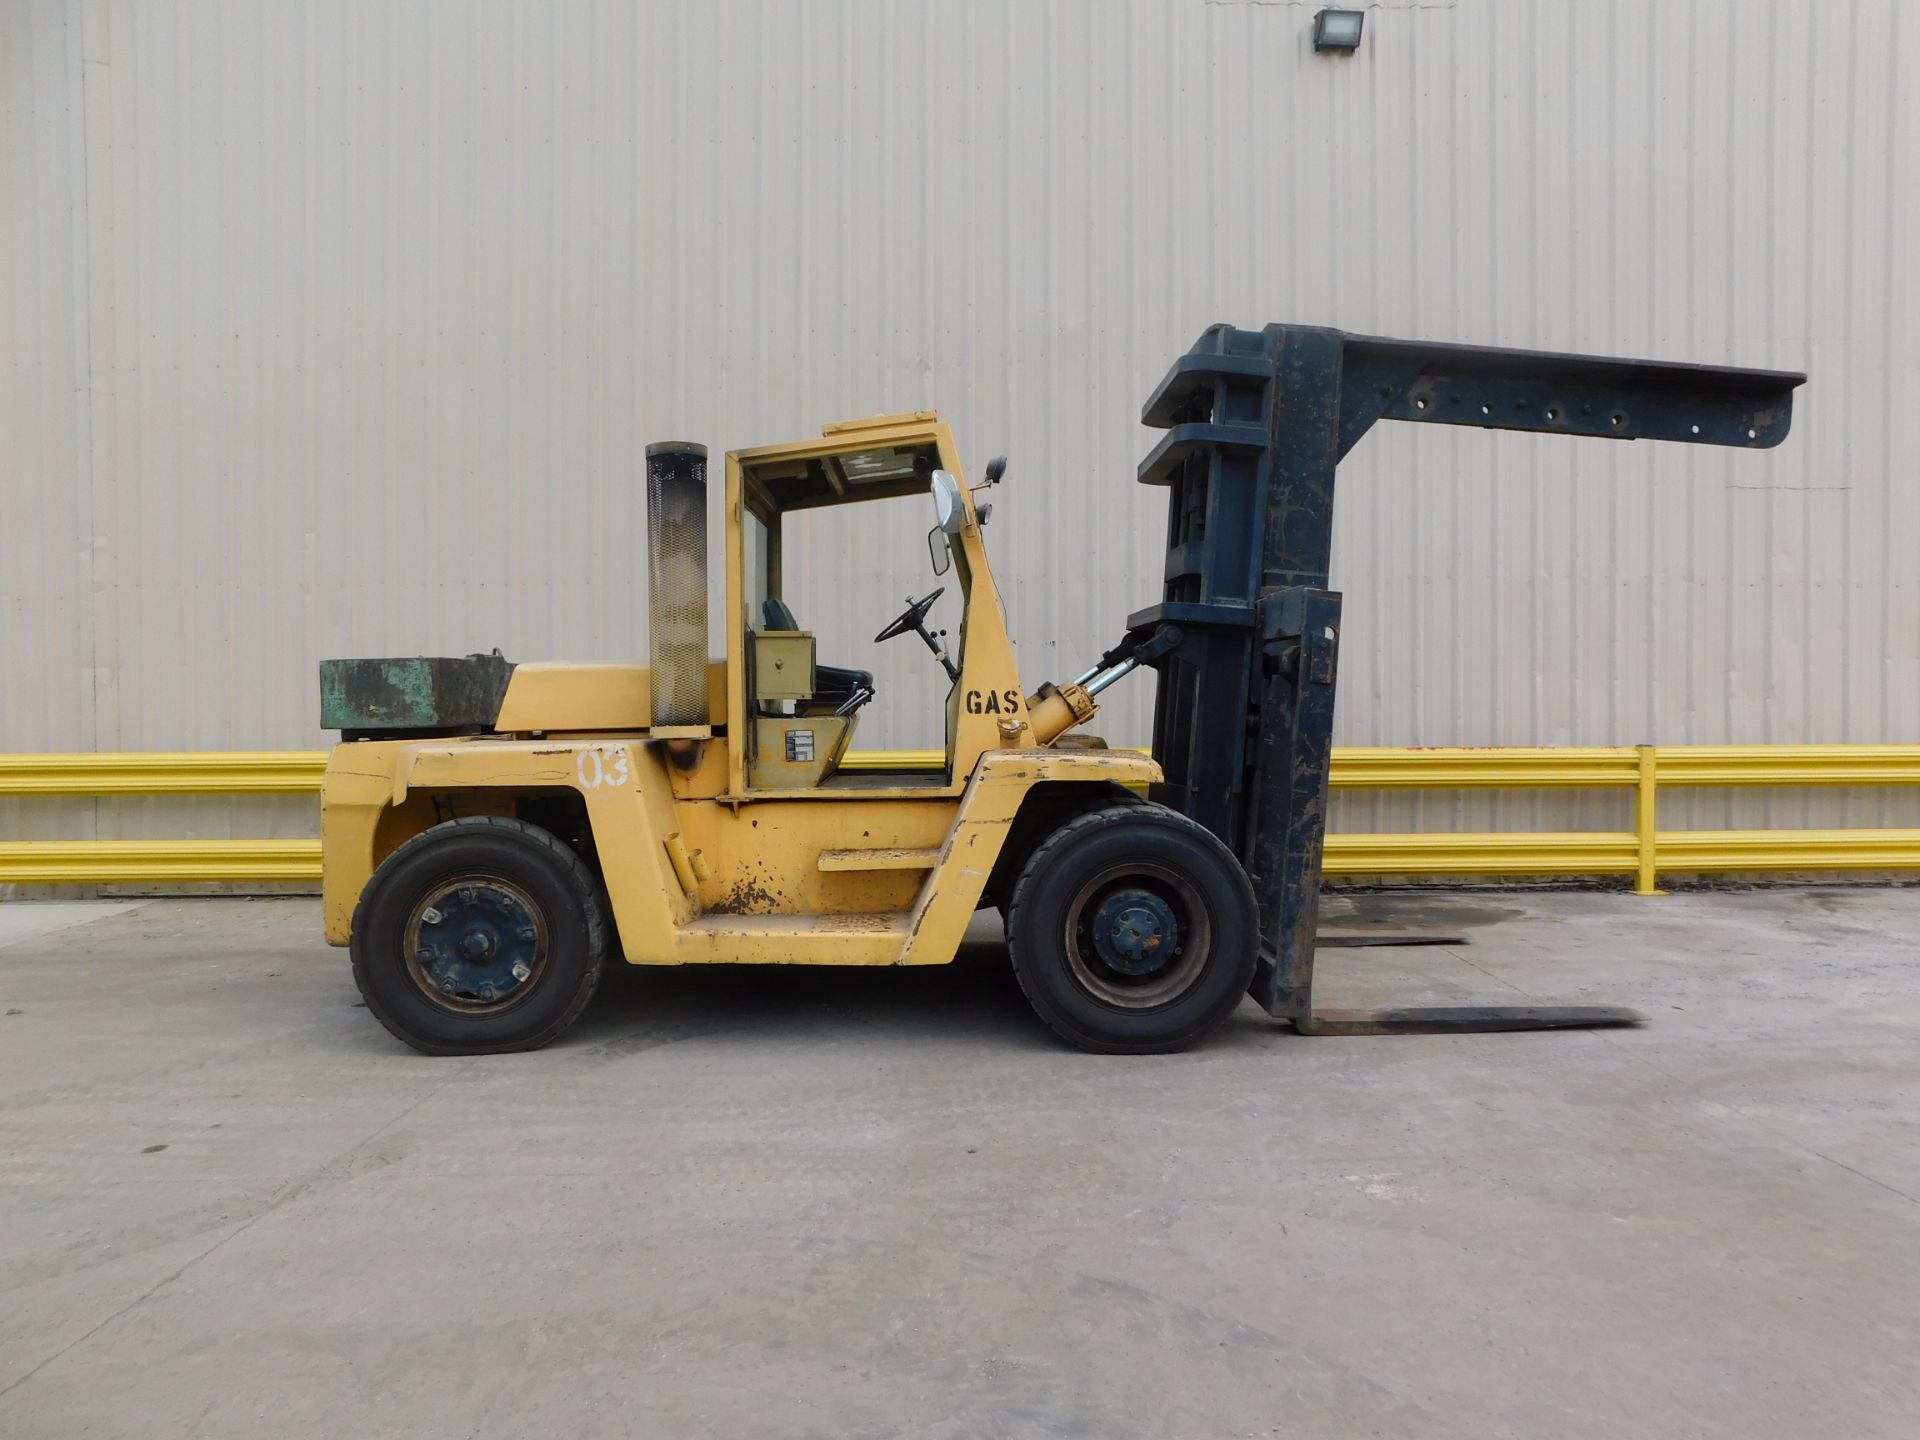 CLARK C500YS250 25,000 LB GAS FORKLIFT WITH 8' BOOM. 60" x 8" FORKS